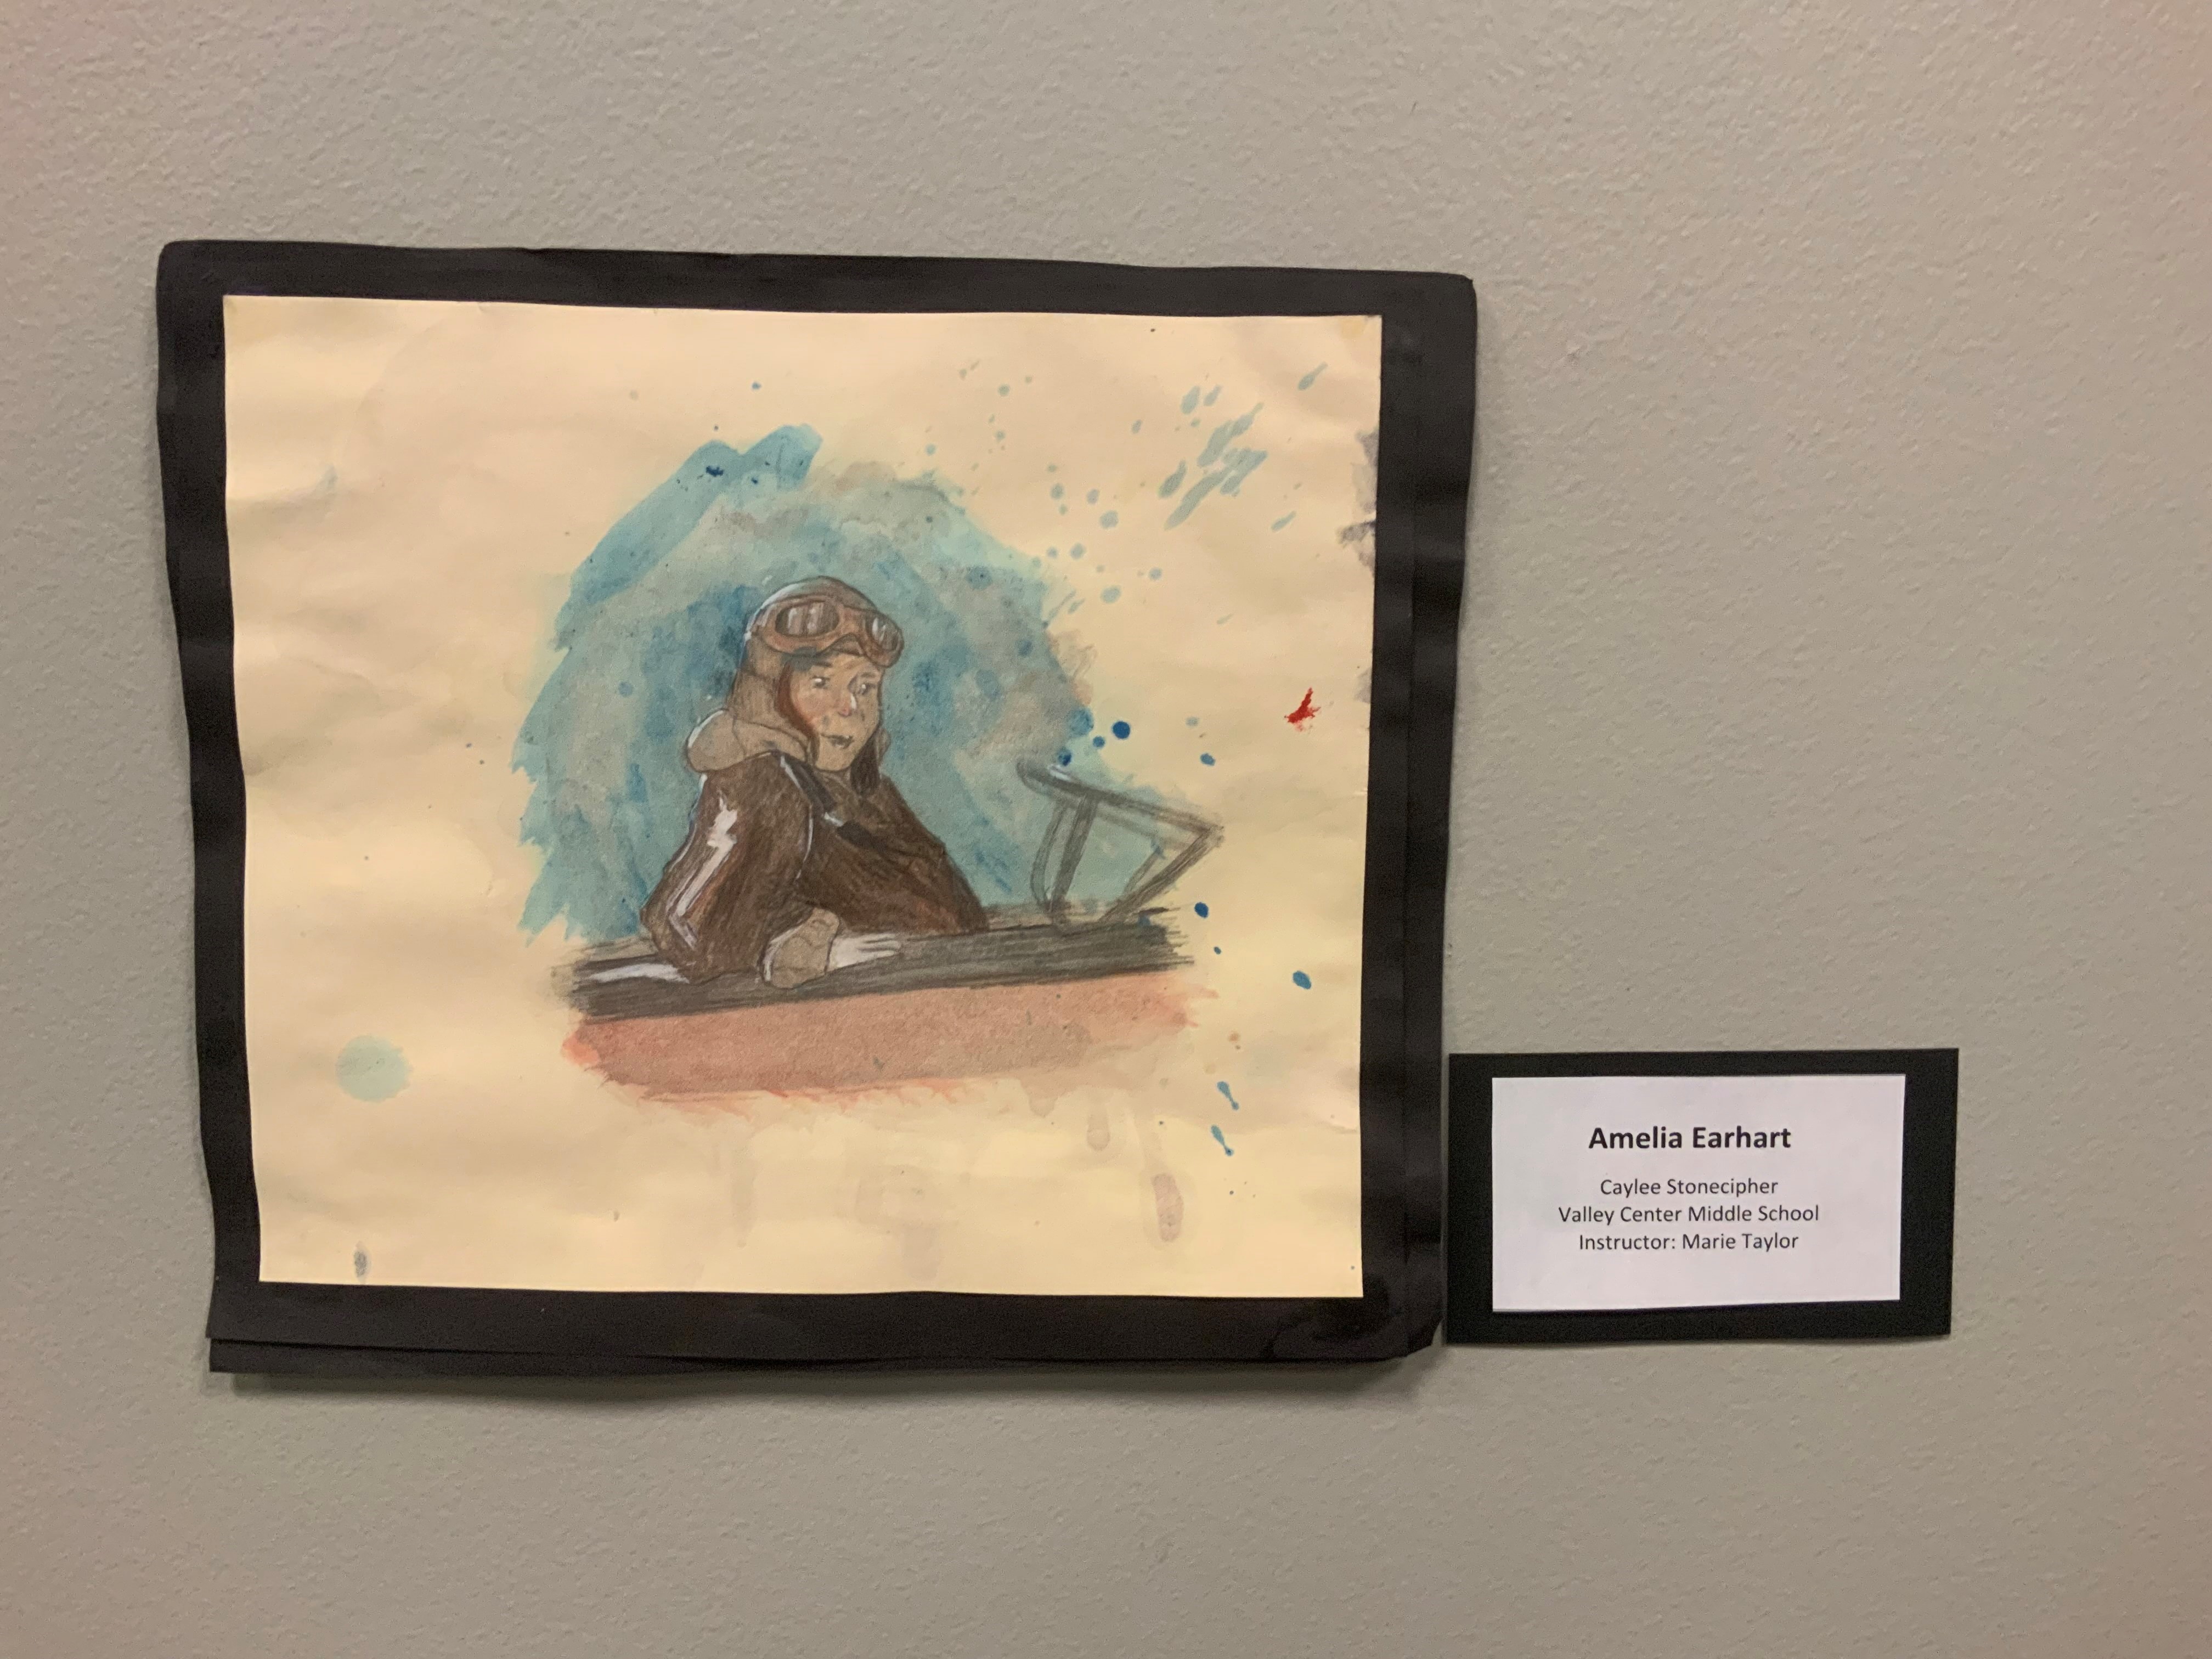 Amelia Earhart by Caylee Stonecipher